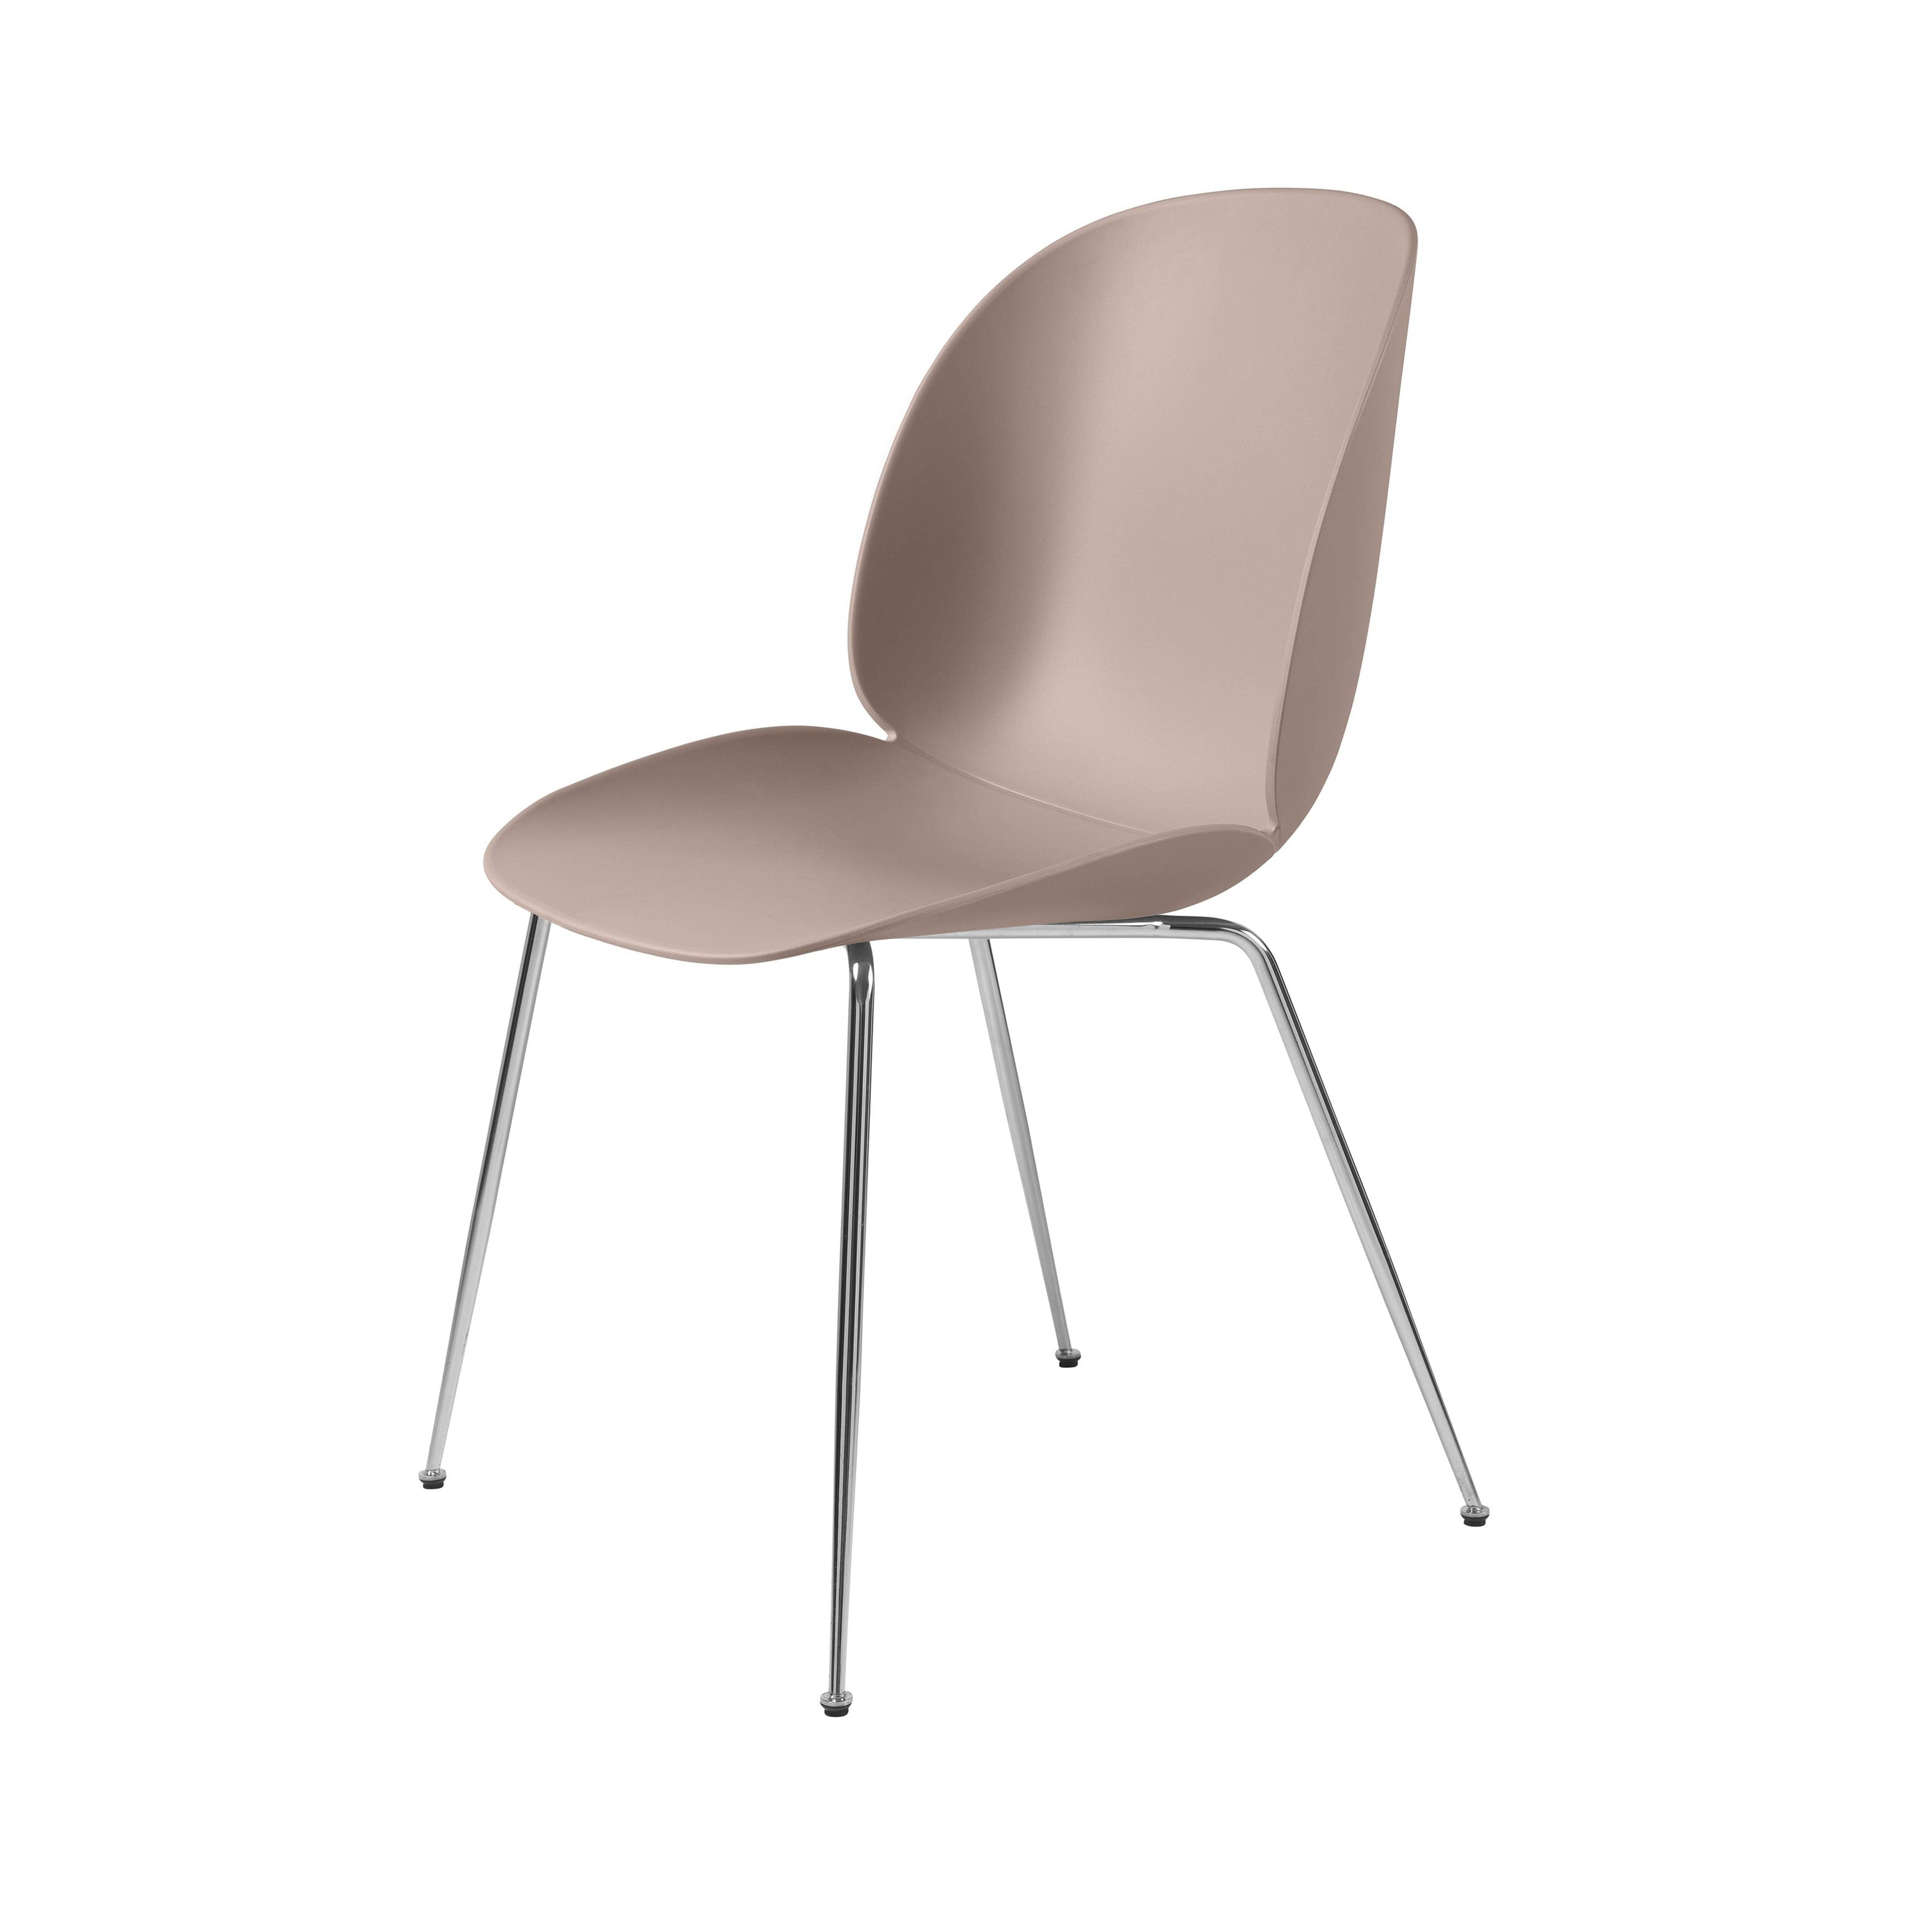 Beetle Dining Chair: Conic Base + Sweet Pink + Chrome + Felt Glides